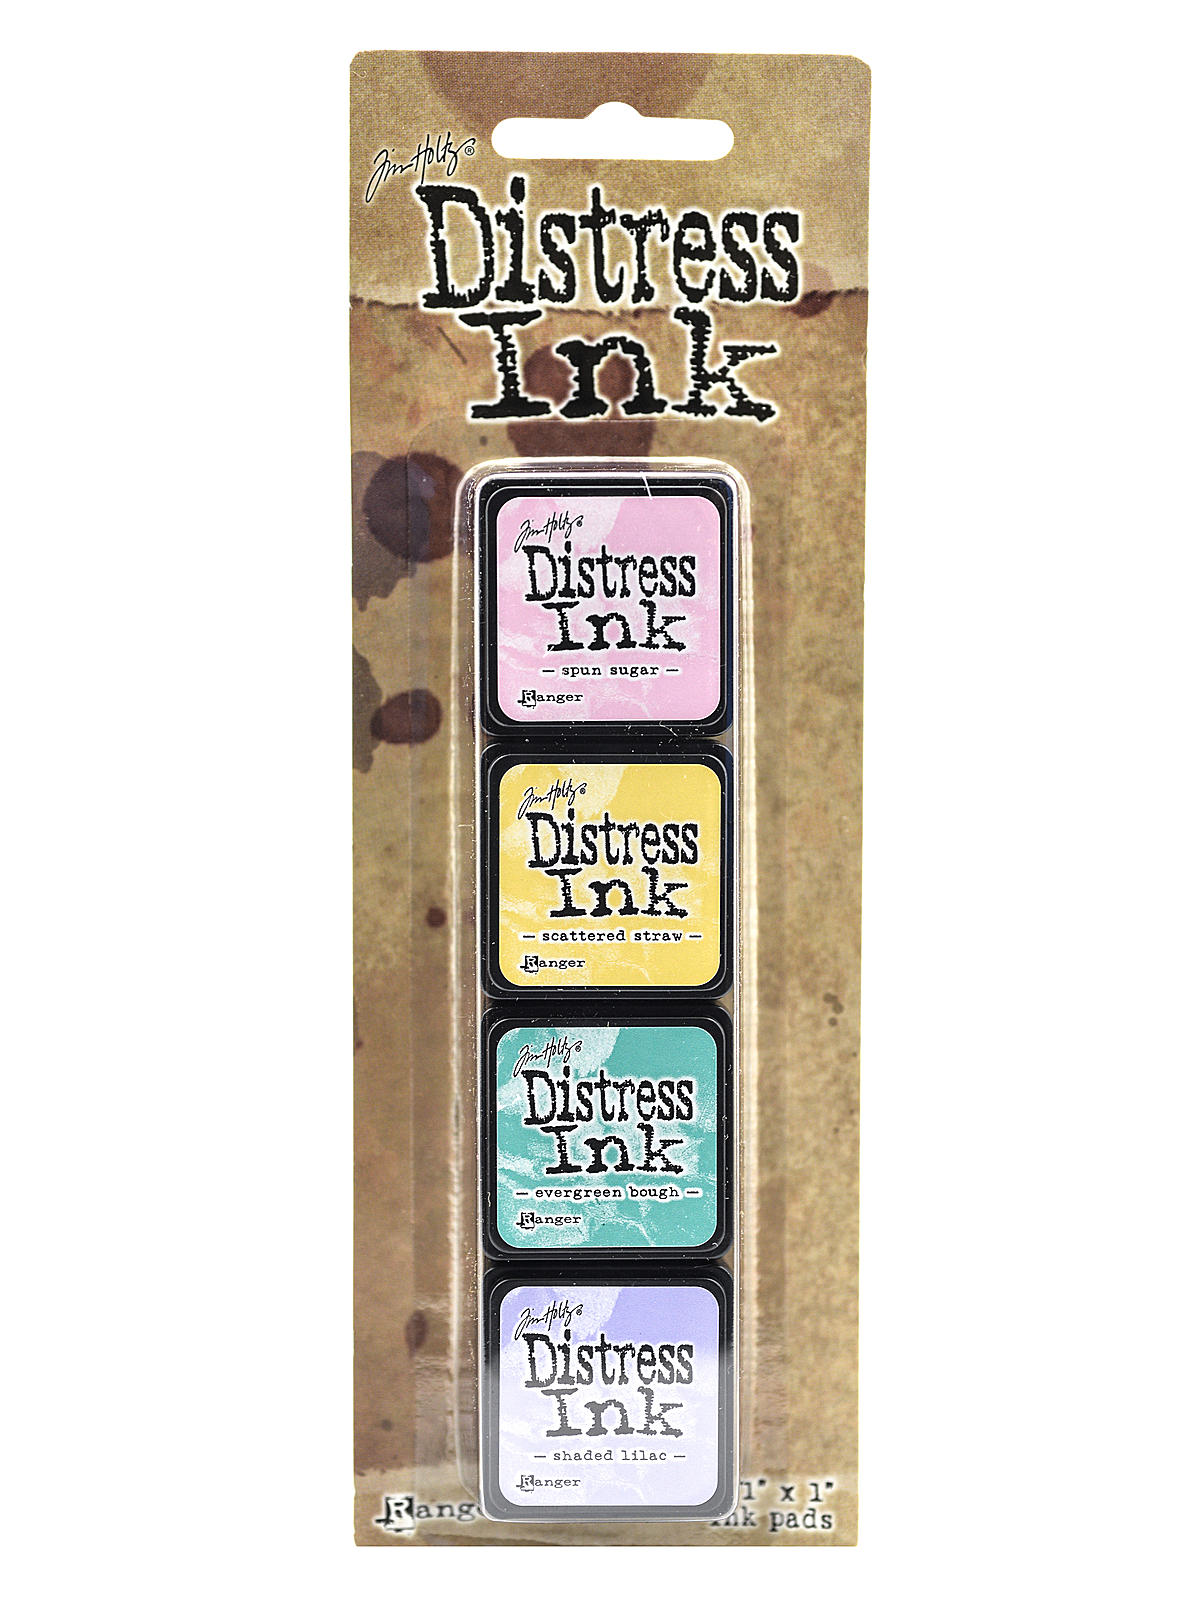 Tim Holtz Mini Distress Ink Pads Kit #4 1 In. X 1 In. Set Of 4 Colors